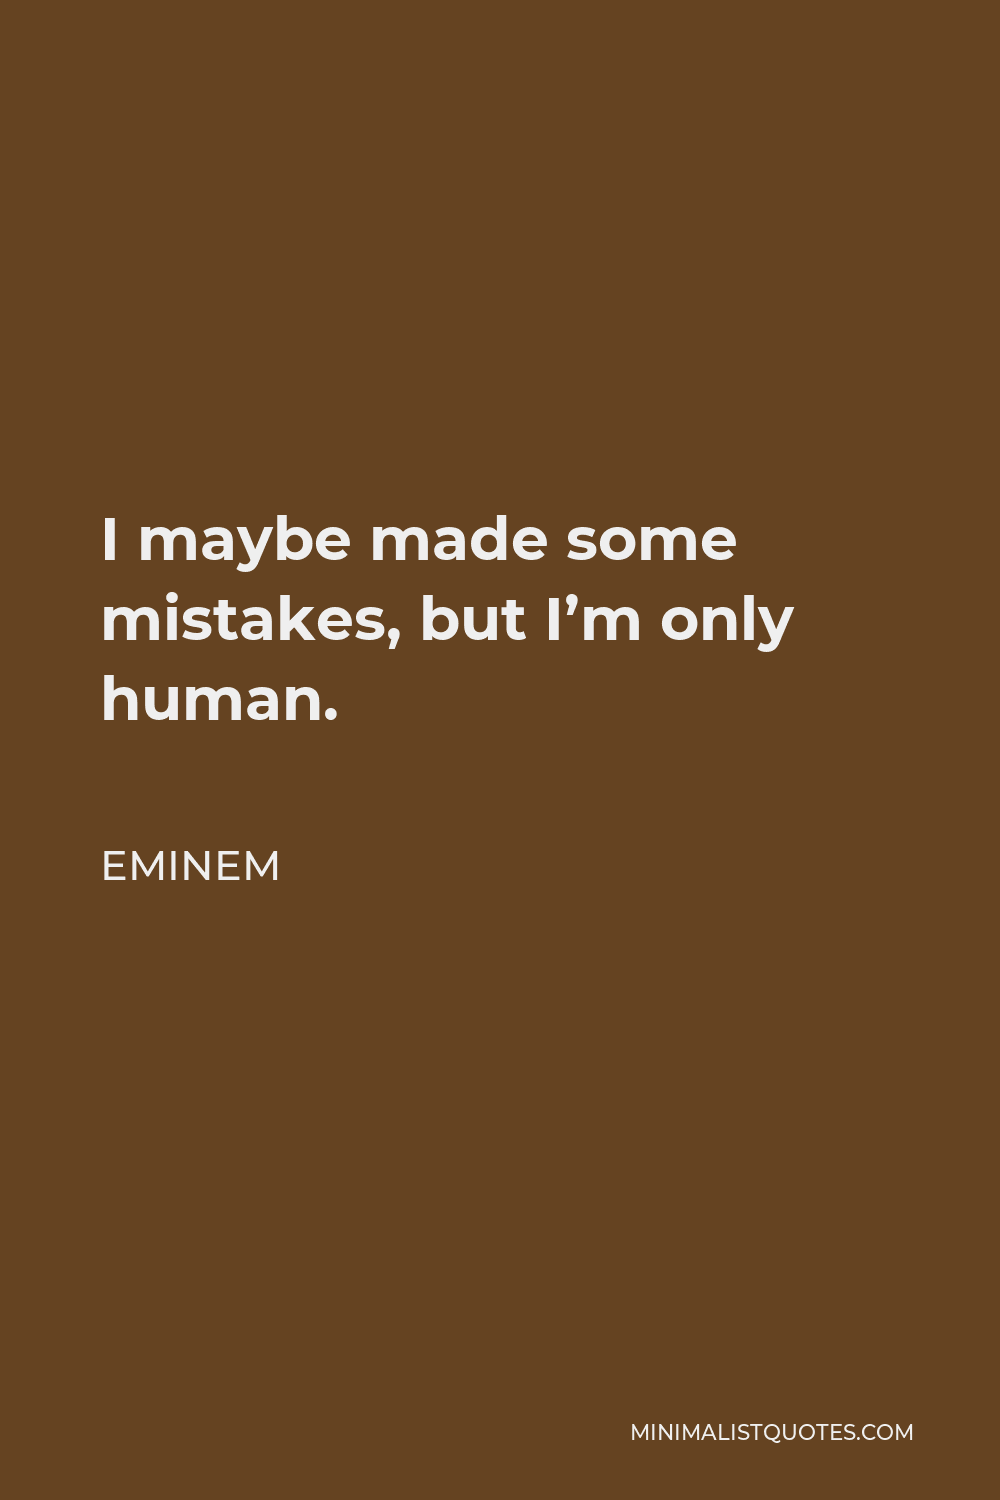 Eminem Quote - I maybe made some mistakes, but I’m only human.